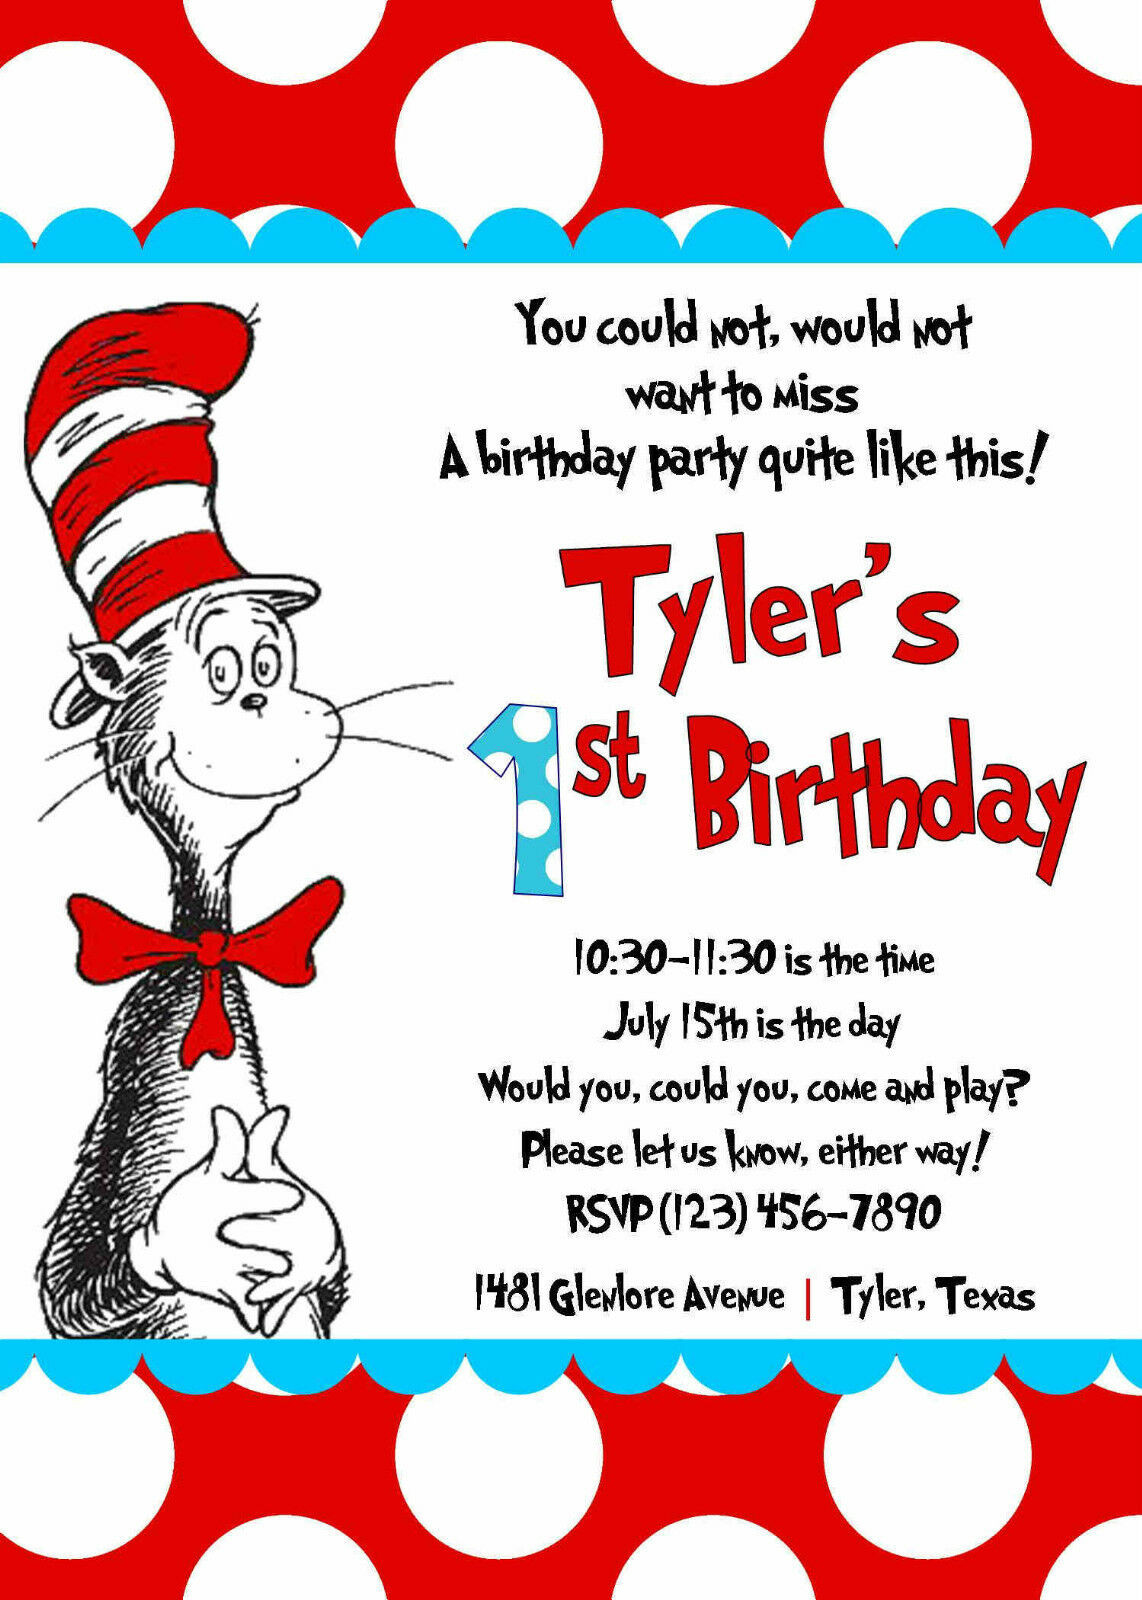 Dr Seuss Birthday Invitation
 Cat in the Hat Invitation printed 5x7 Customized